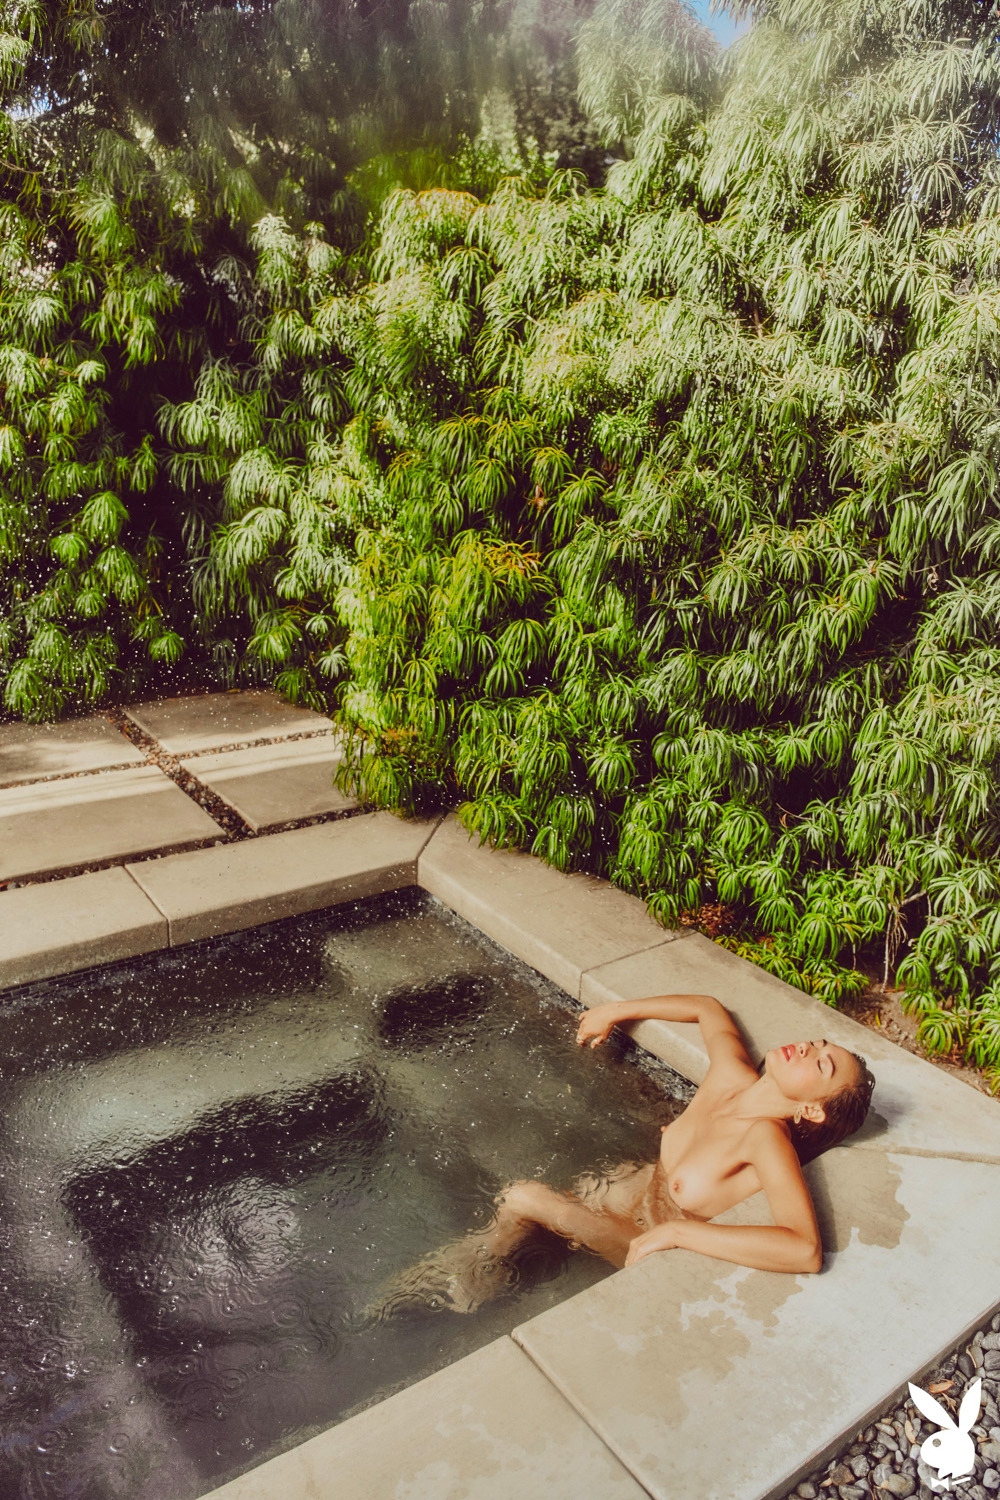 Genevieve Liberte skinny-dipping in the sun-drenched backyard